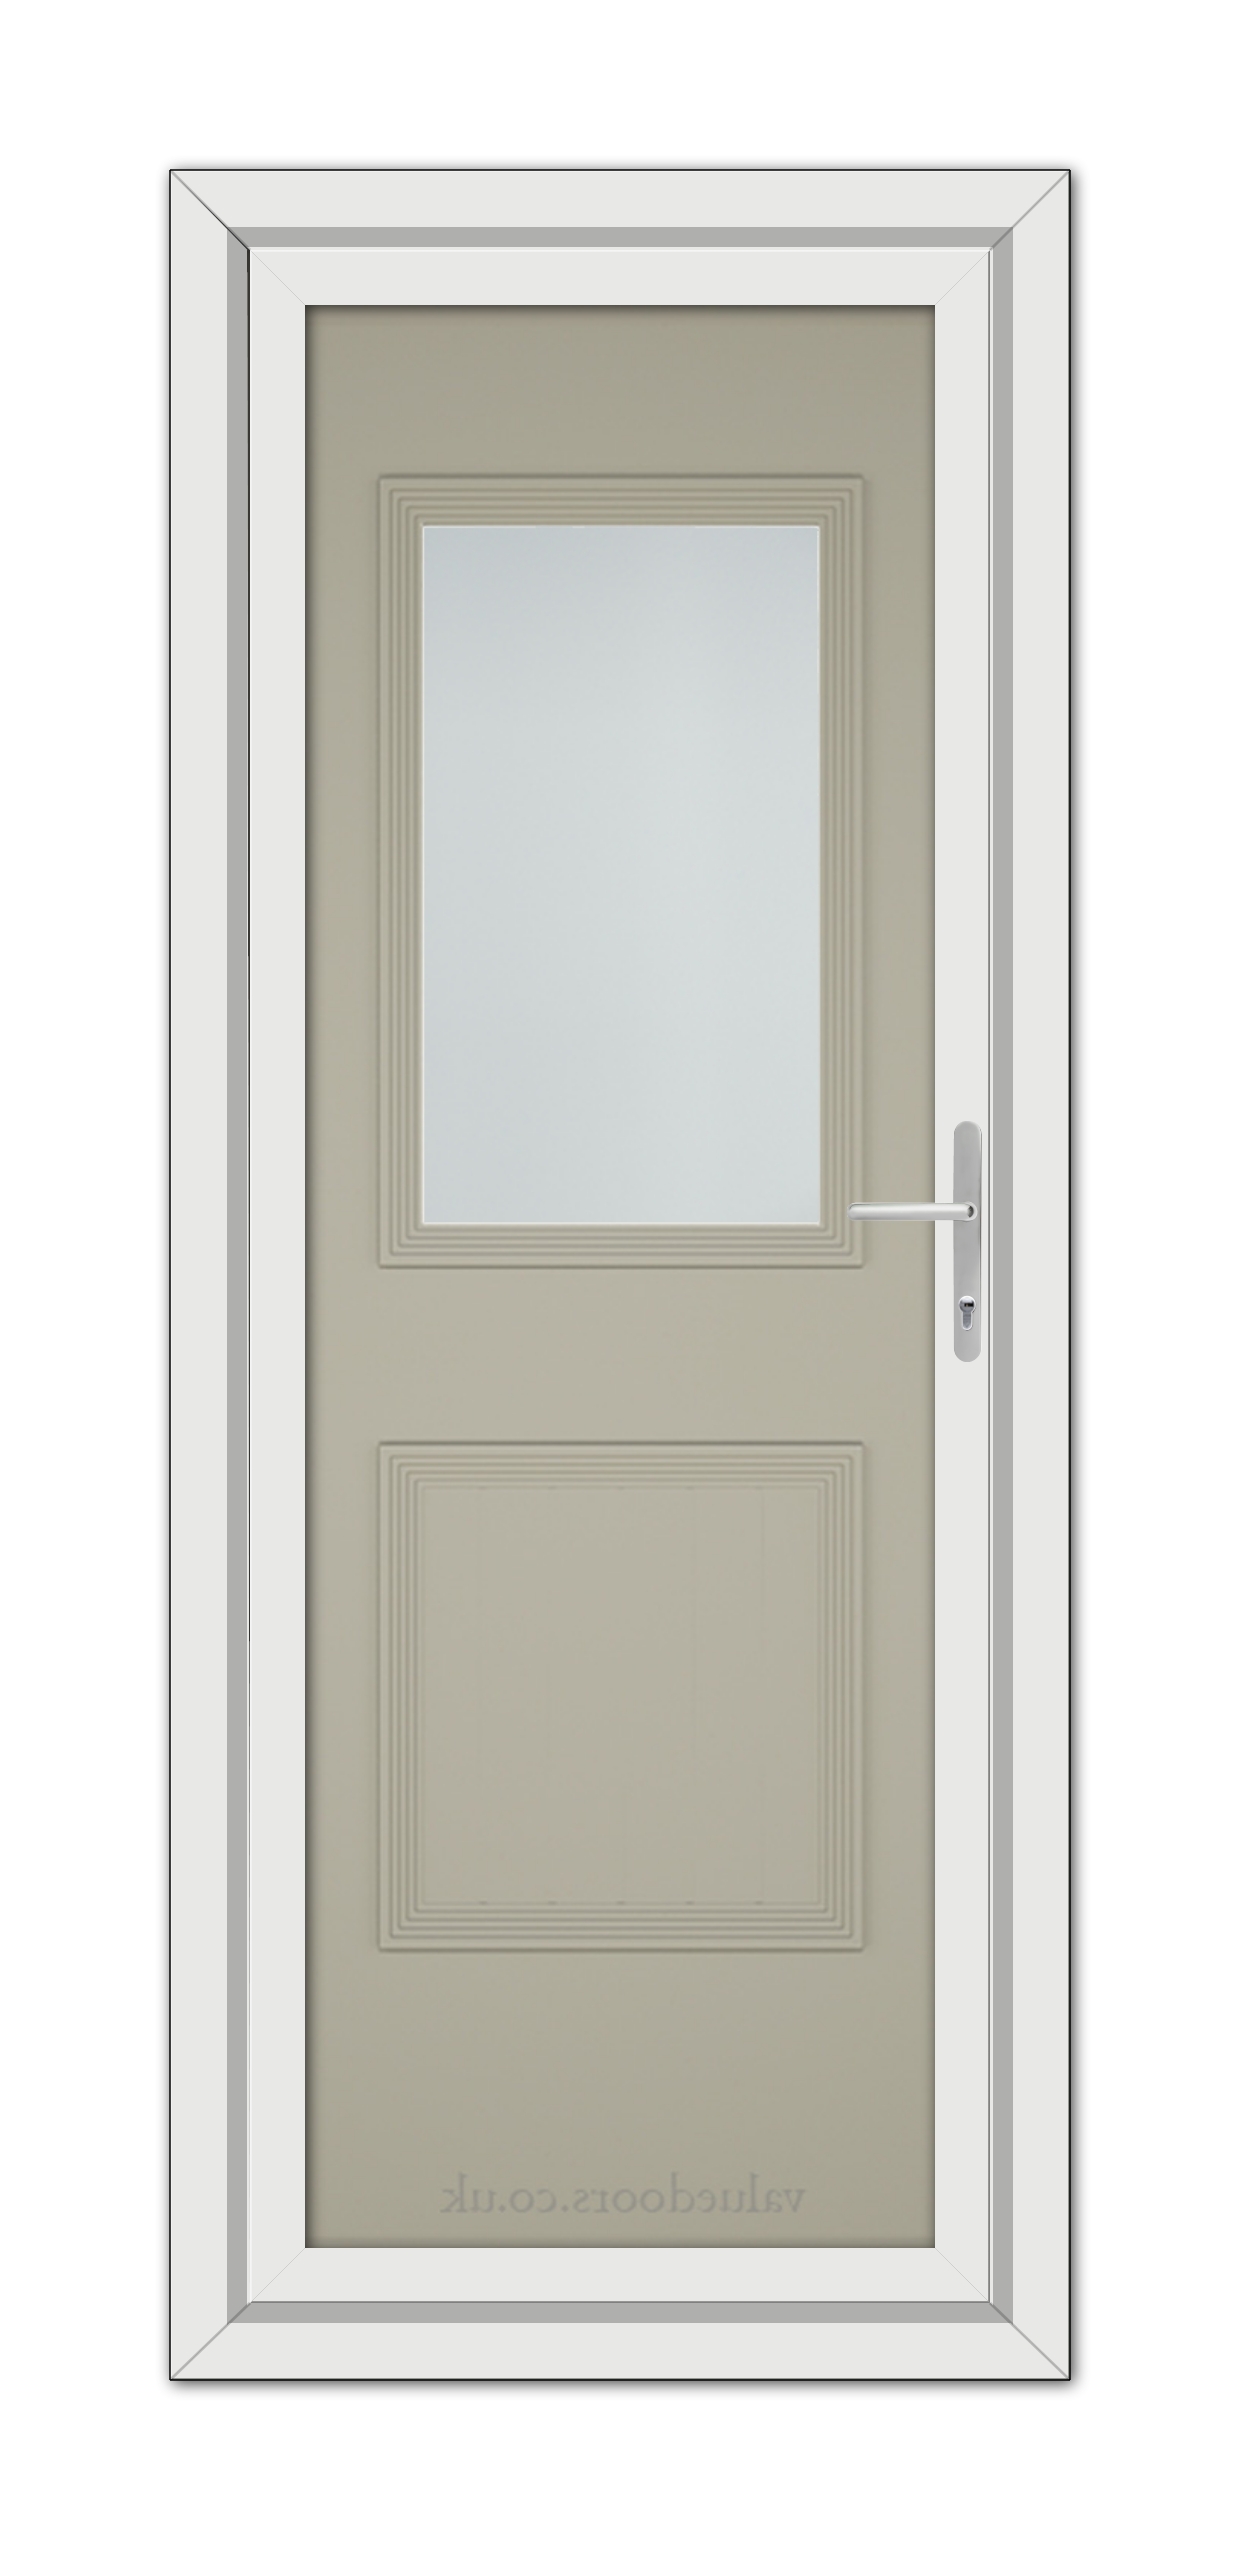 A Pebble Grey Alnwick One uPVC Door in a light gray color with a rectangular glass panel in the upper half and a solid lower half, featuring a metal handle on the right.